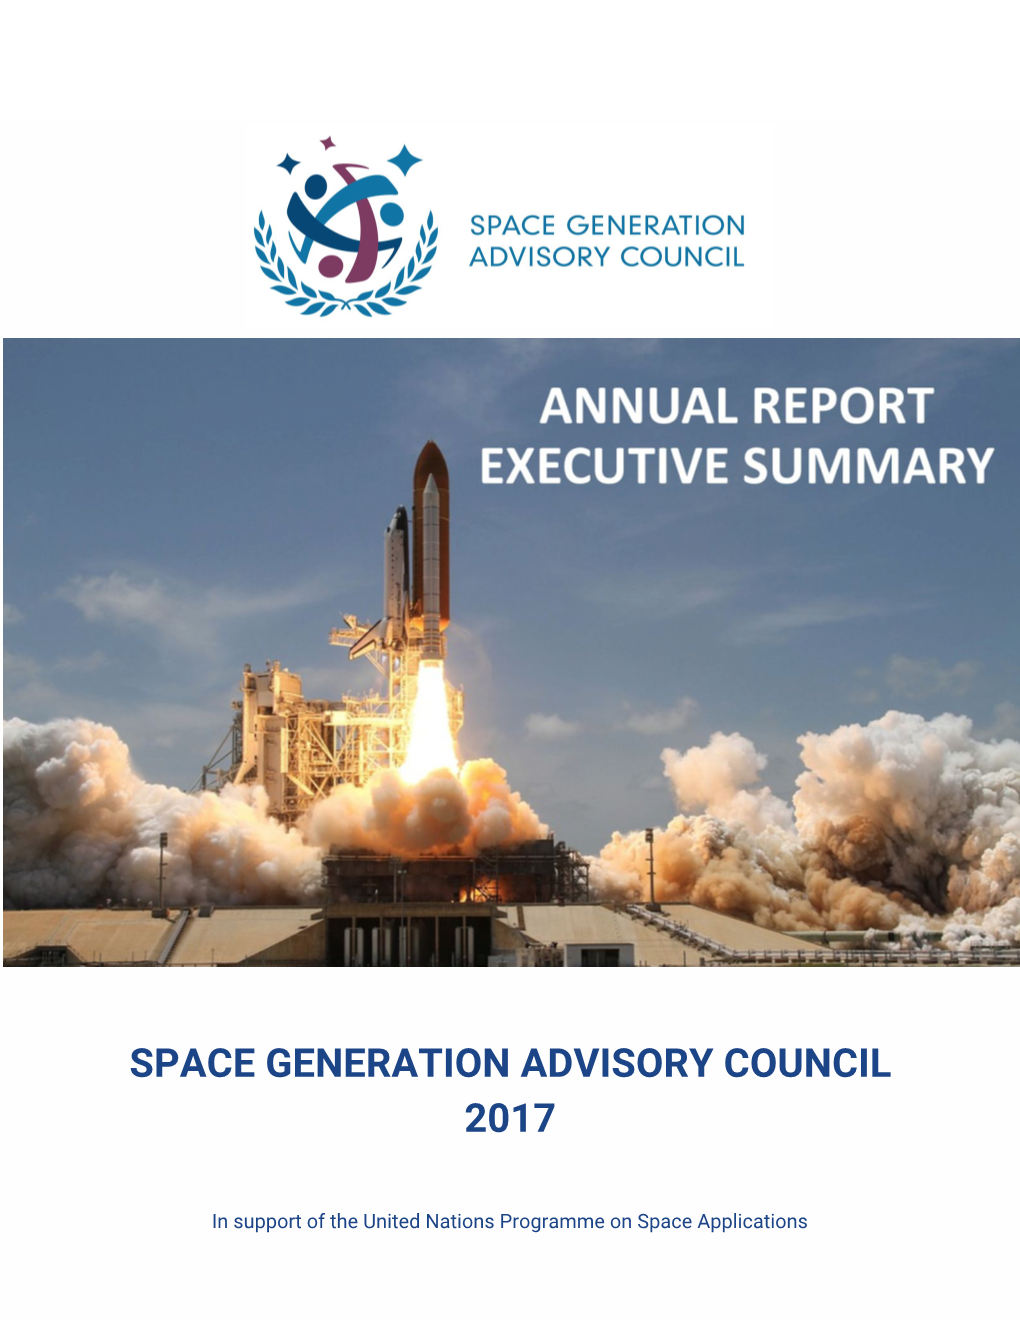 Space Generation Advisory Council 2017